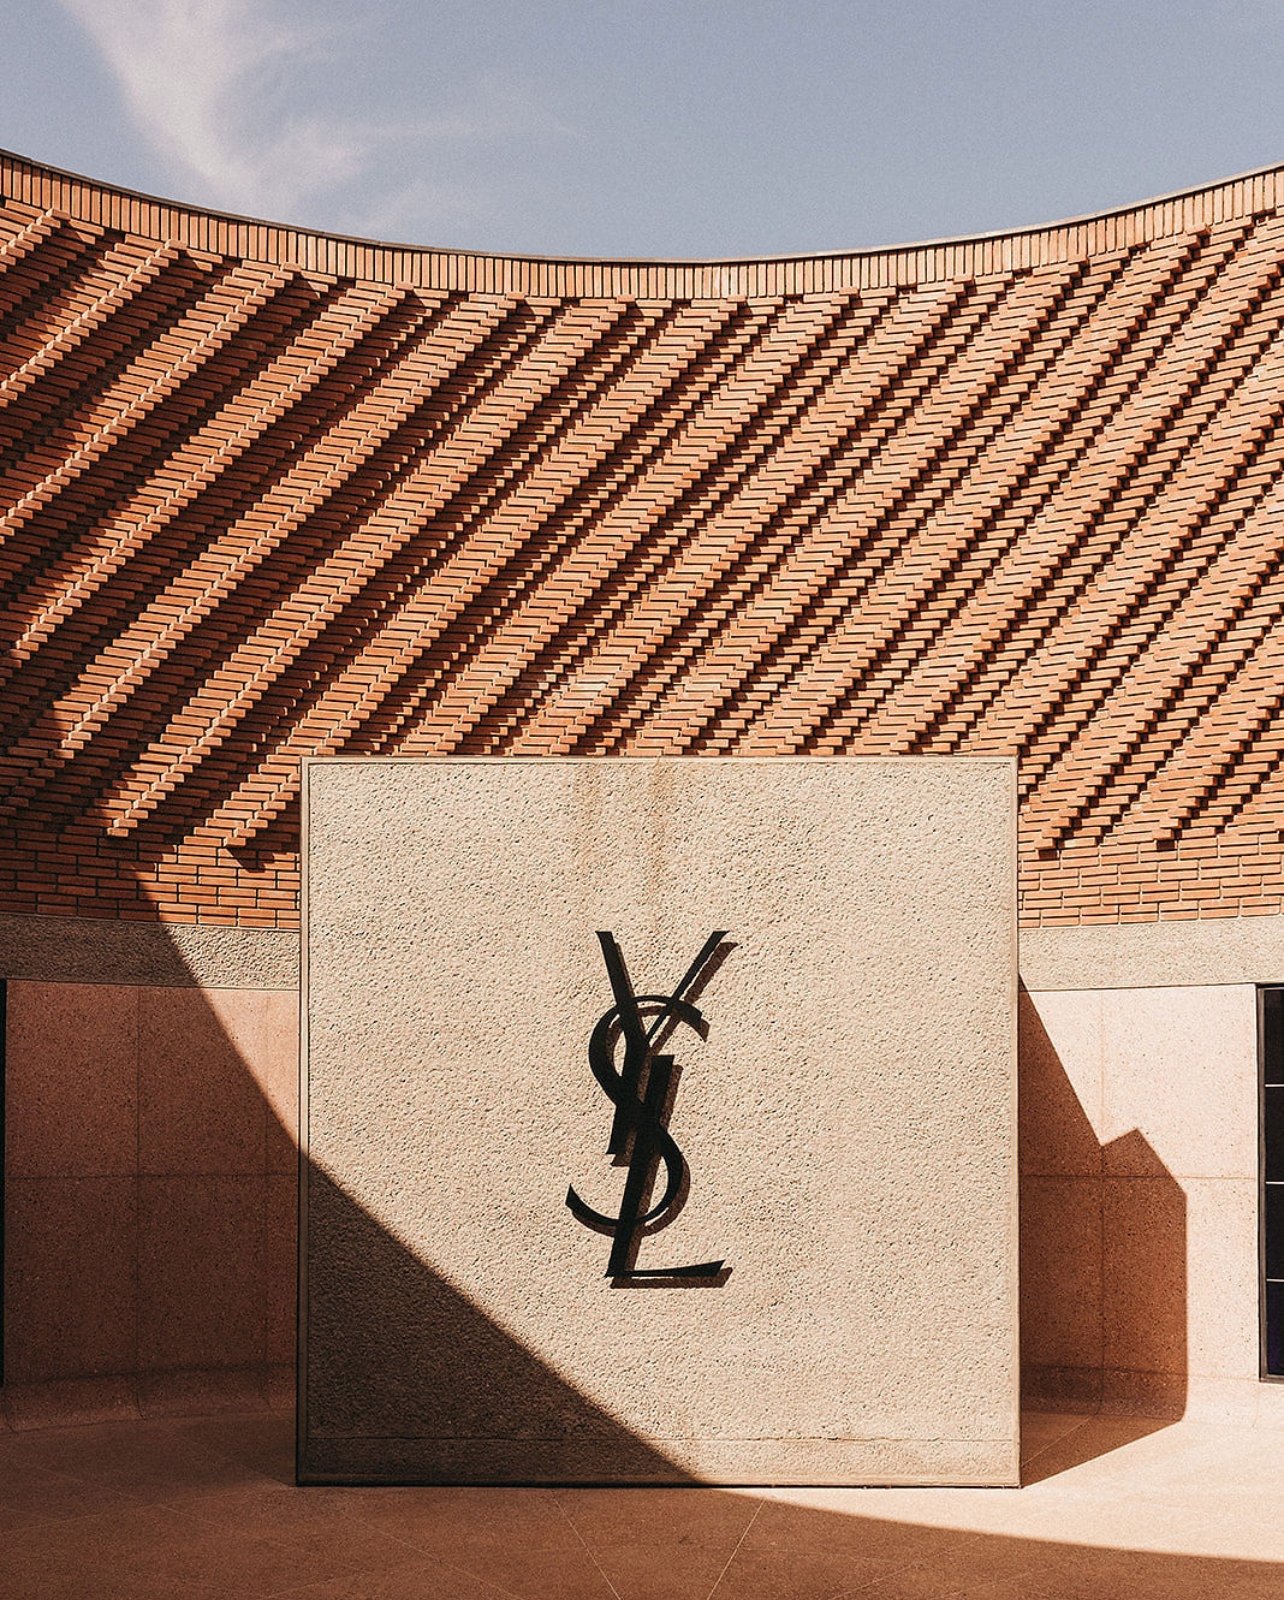 Portrait of the Yves Saint Laurent Museum from last year’s Modern Adventure trip to Morocco with chef Nyesha Arrington